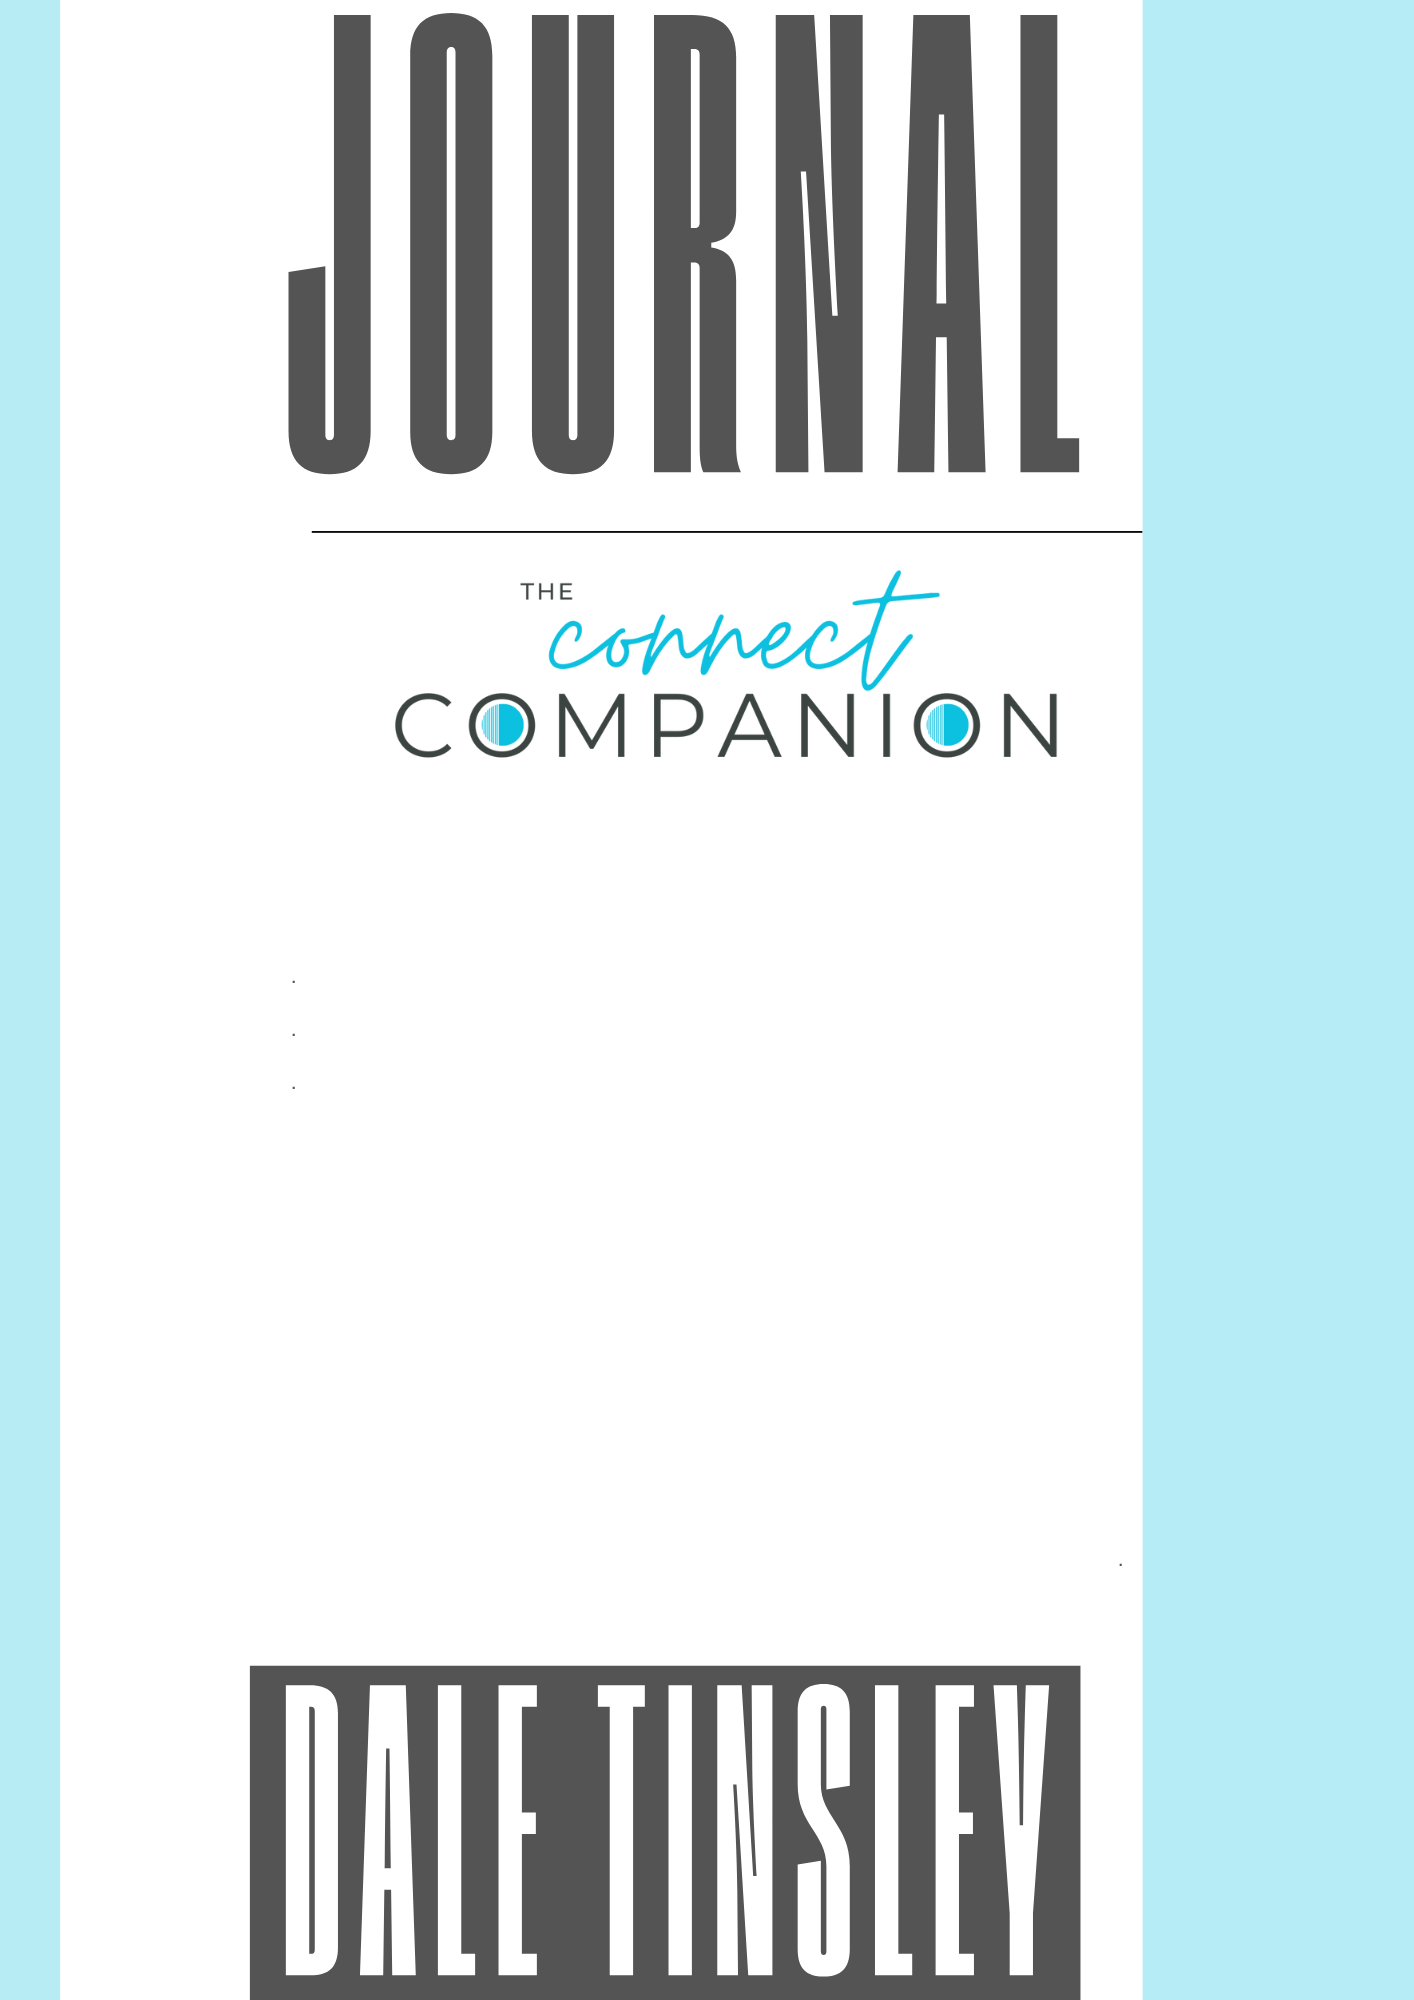 The Connect Companion Journal - Episode 2